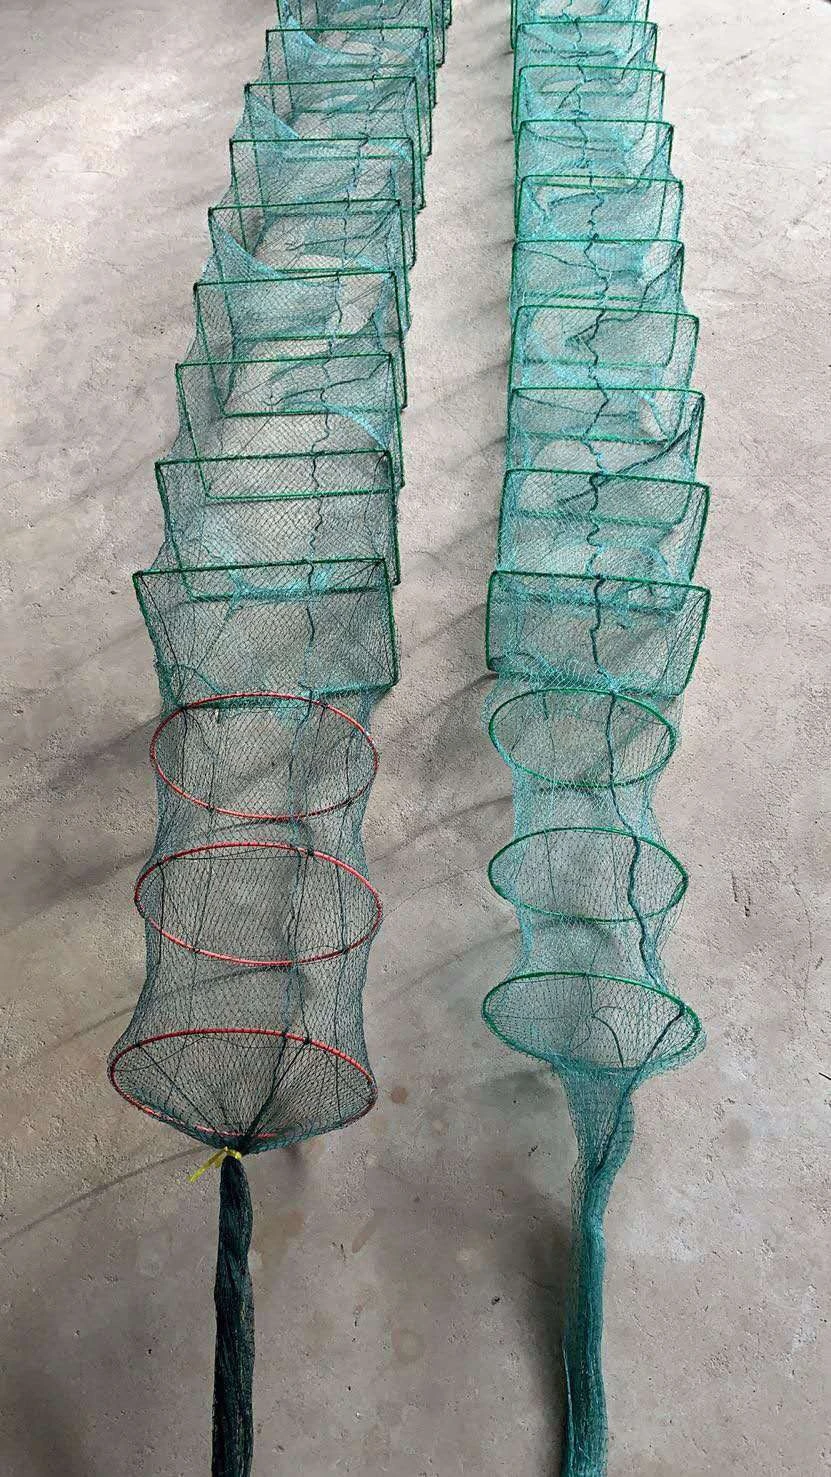 China Supplier Hot Sale Fishing Net fishing trap for catching lobster fish eel shrimp